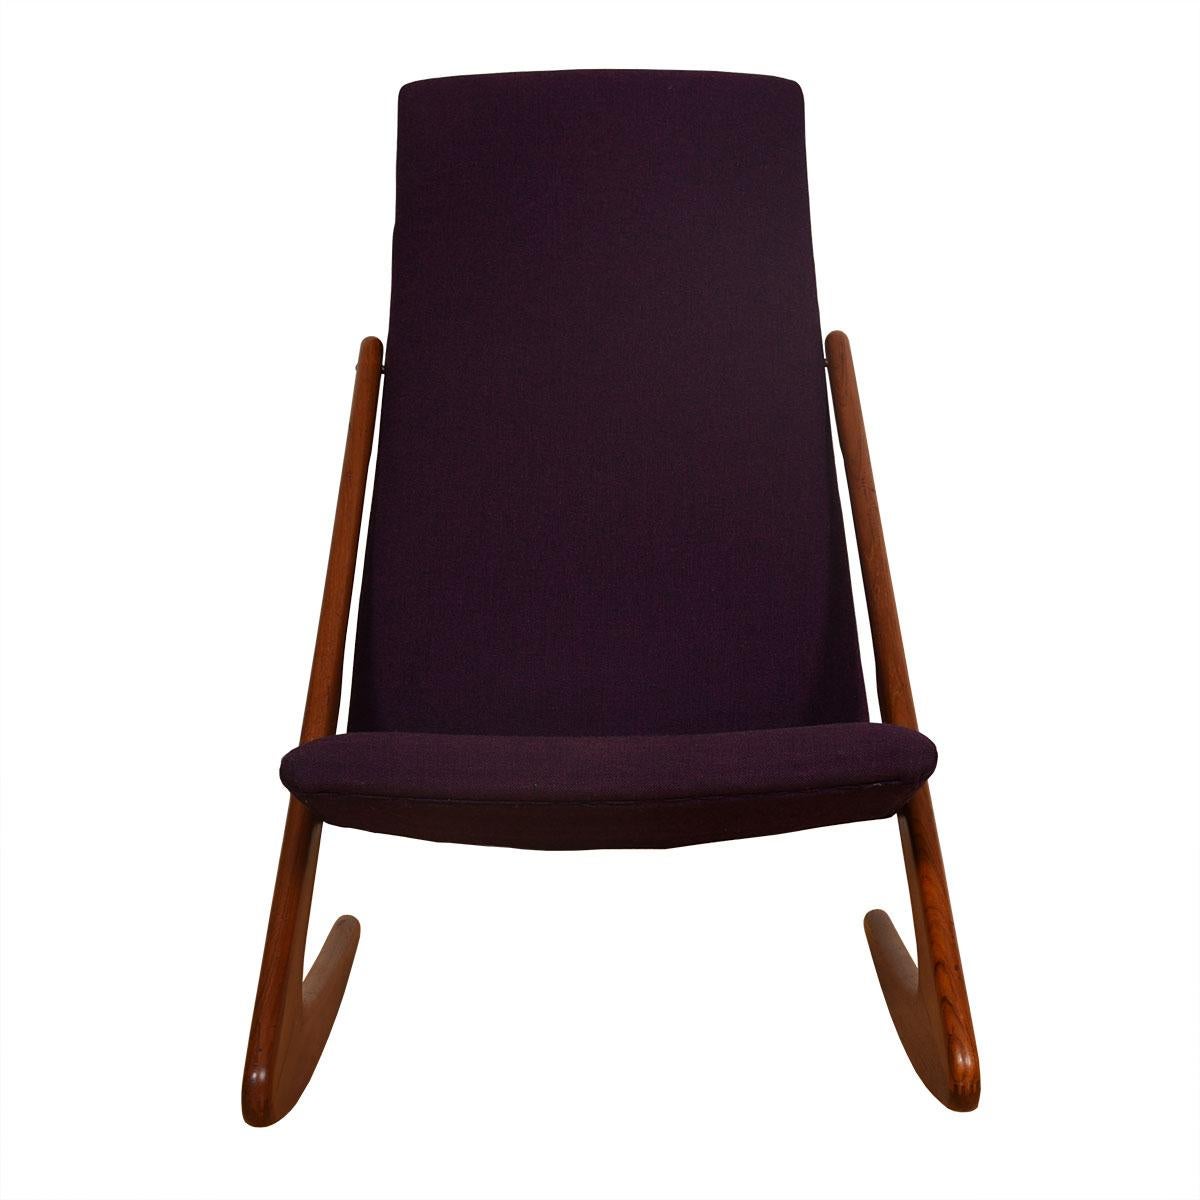 In the style of designer Vladimir Kagan, this chair is designed for minimalism and comfort in nearly any space. This sleek rocker features a pair of teak wood “sickle” frames that support (with original brass hardware) the ergonomically designed